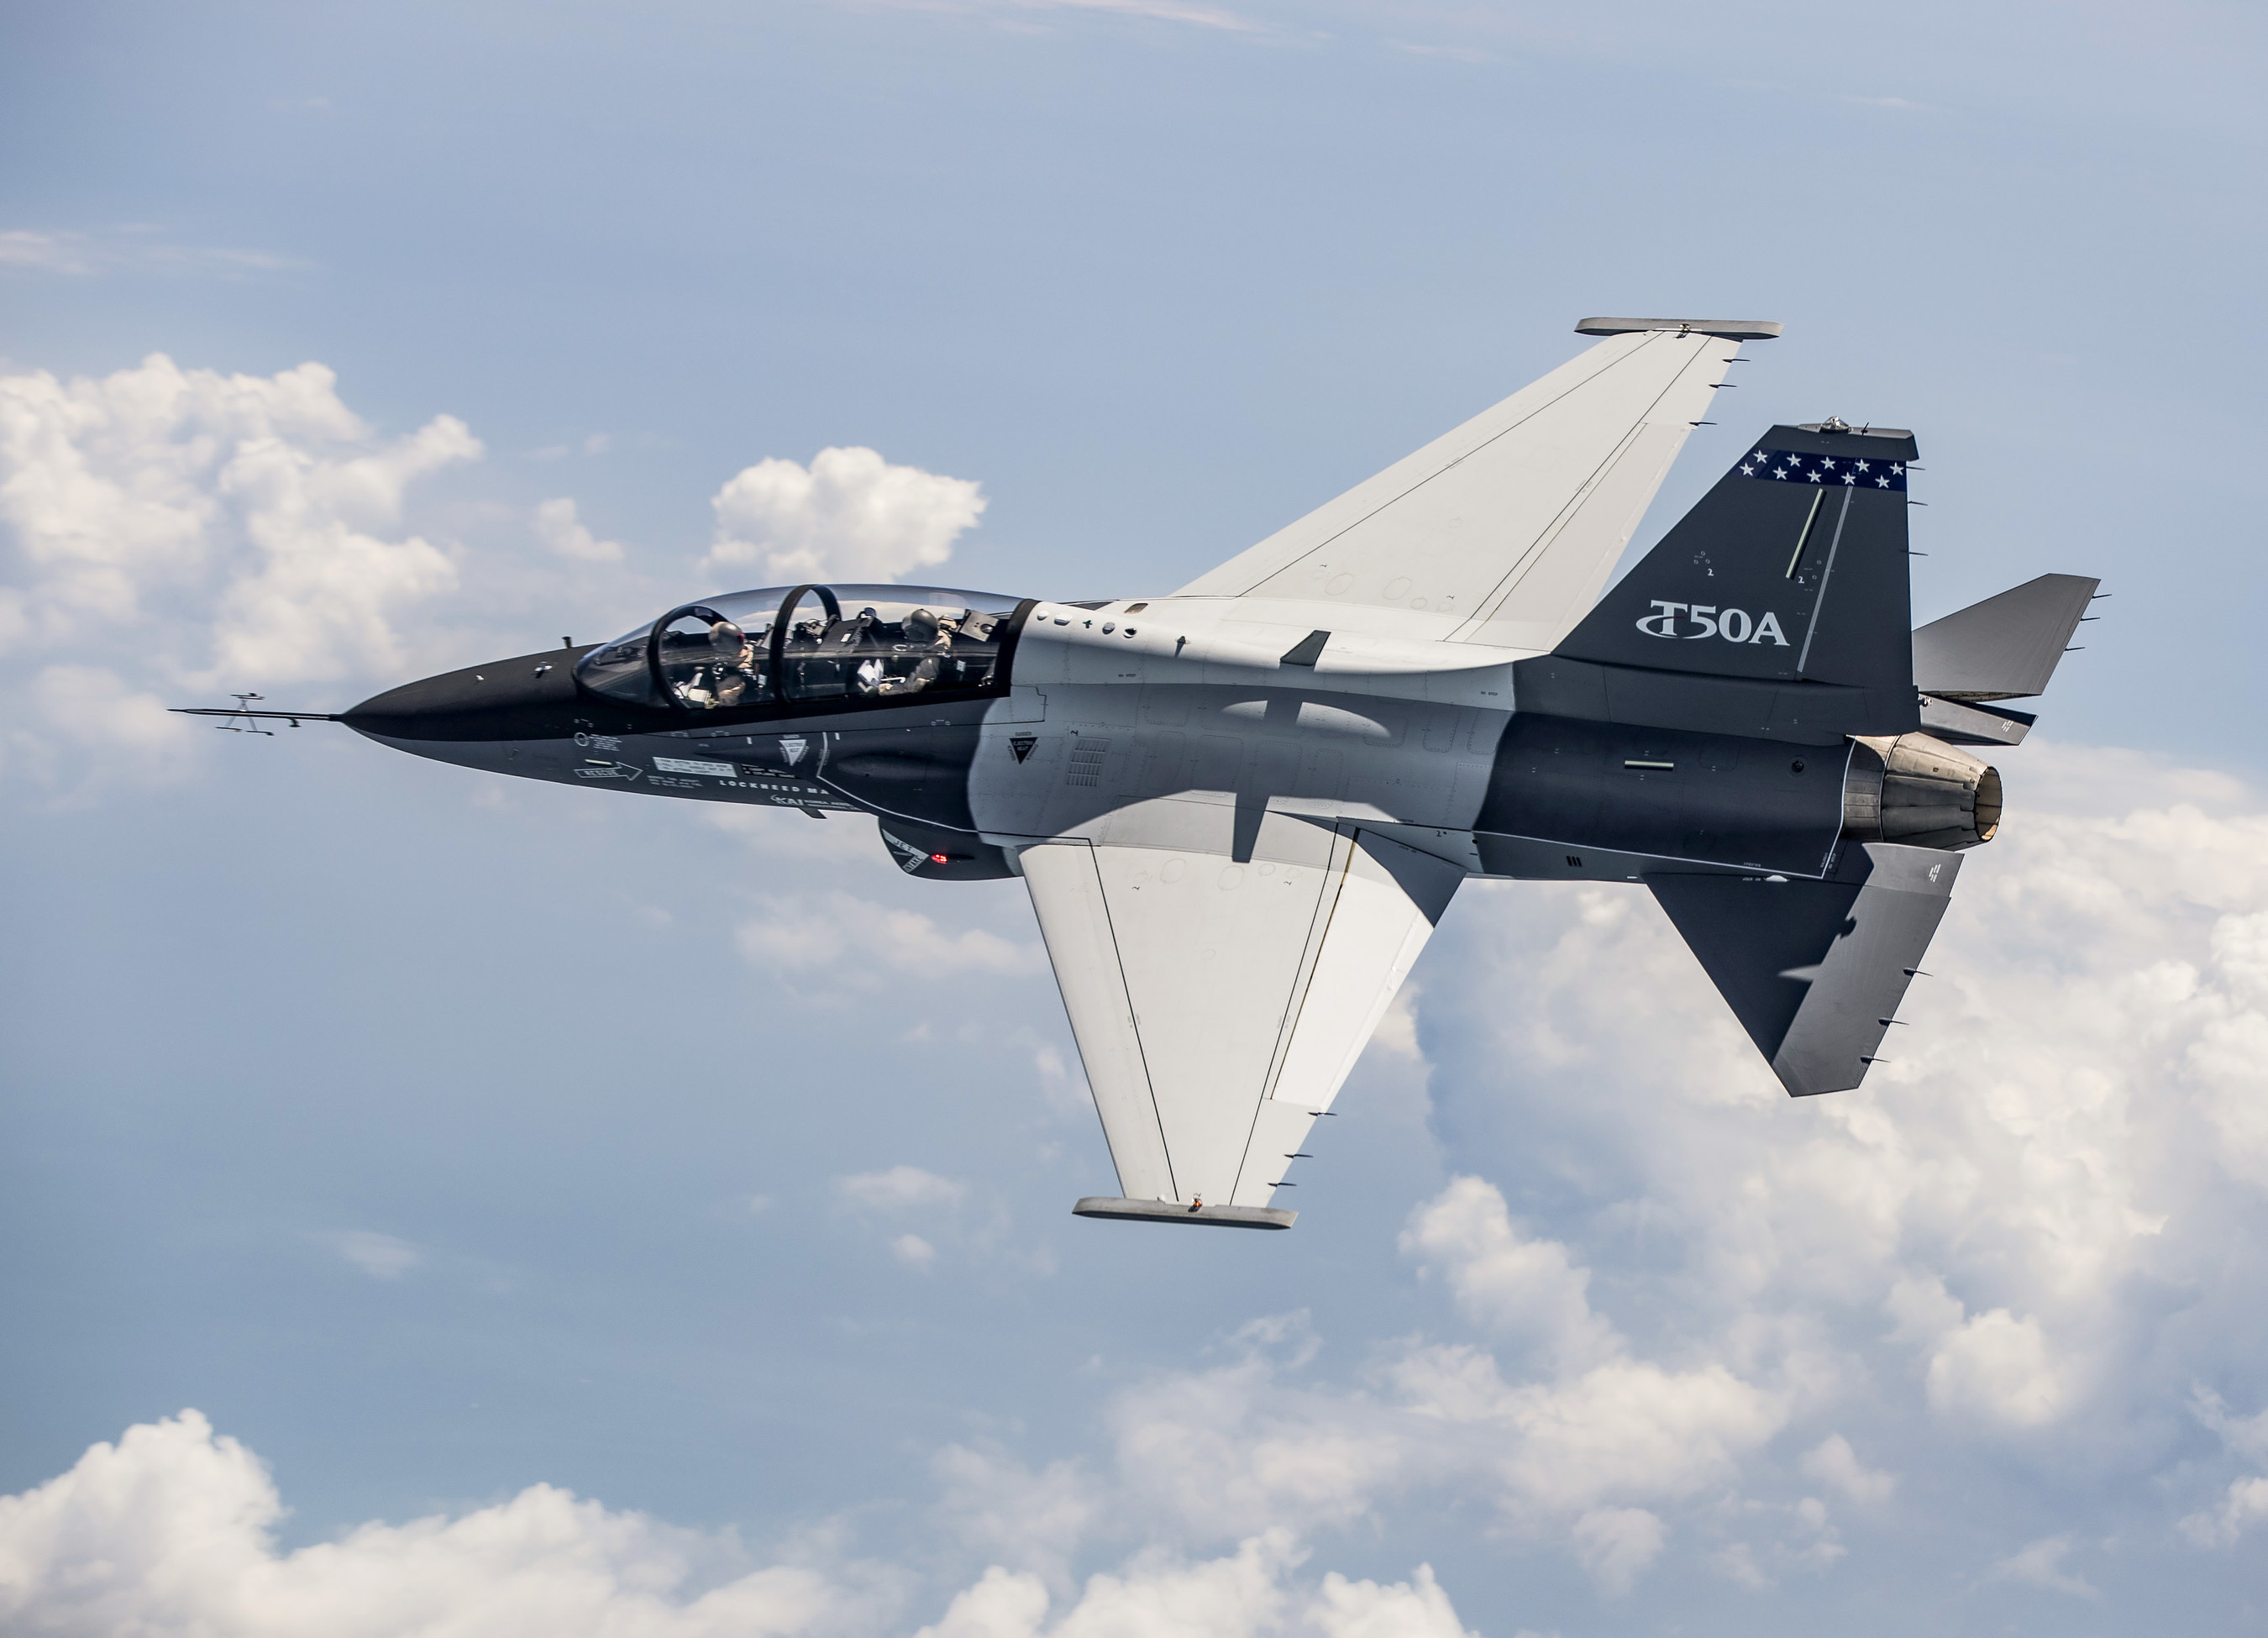 Lockheed Martin's T-50A pictured during the initial flight of the second T-50A configured aircraft.